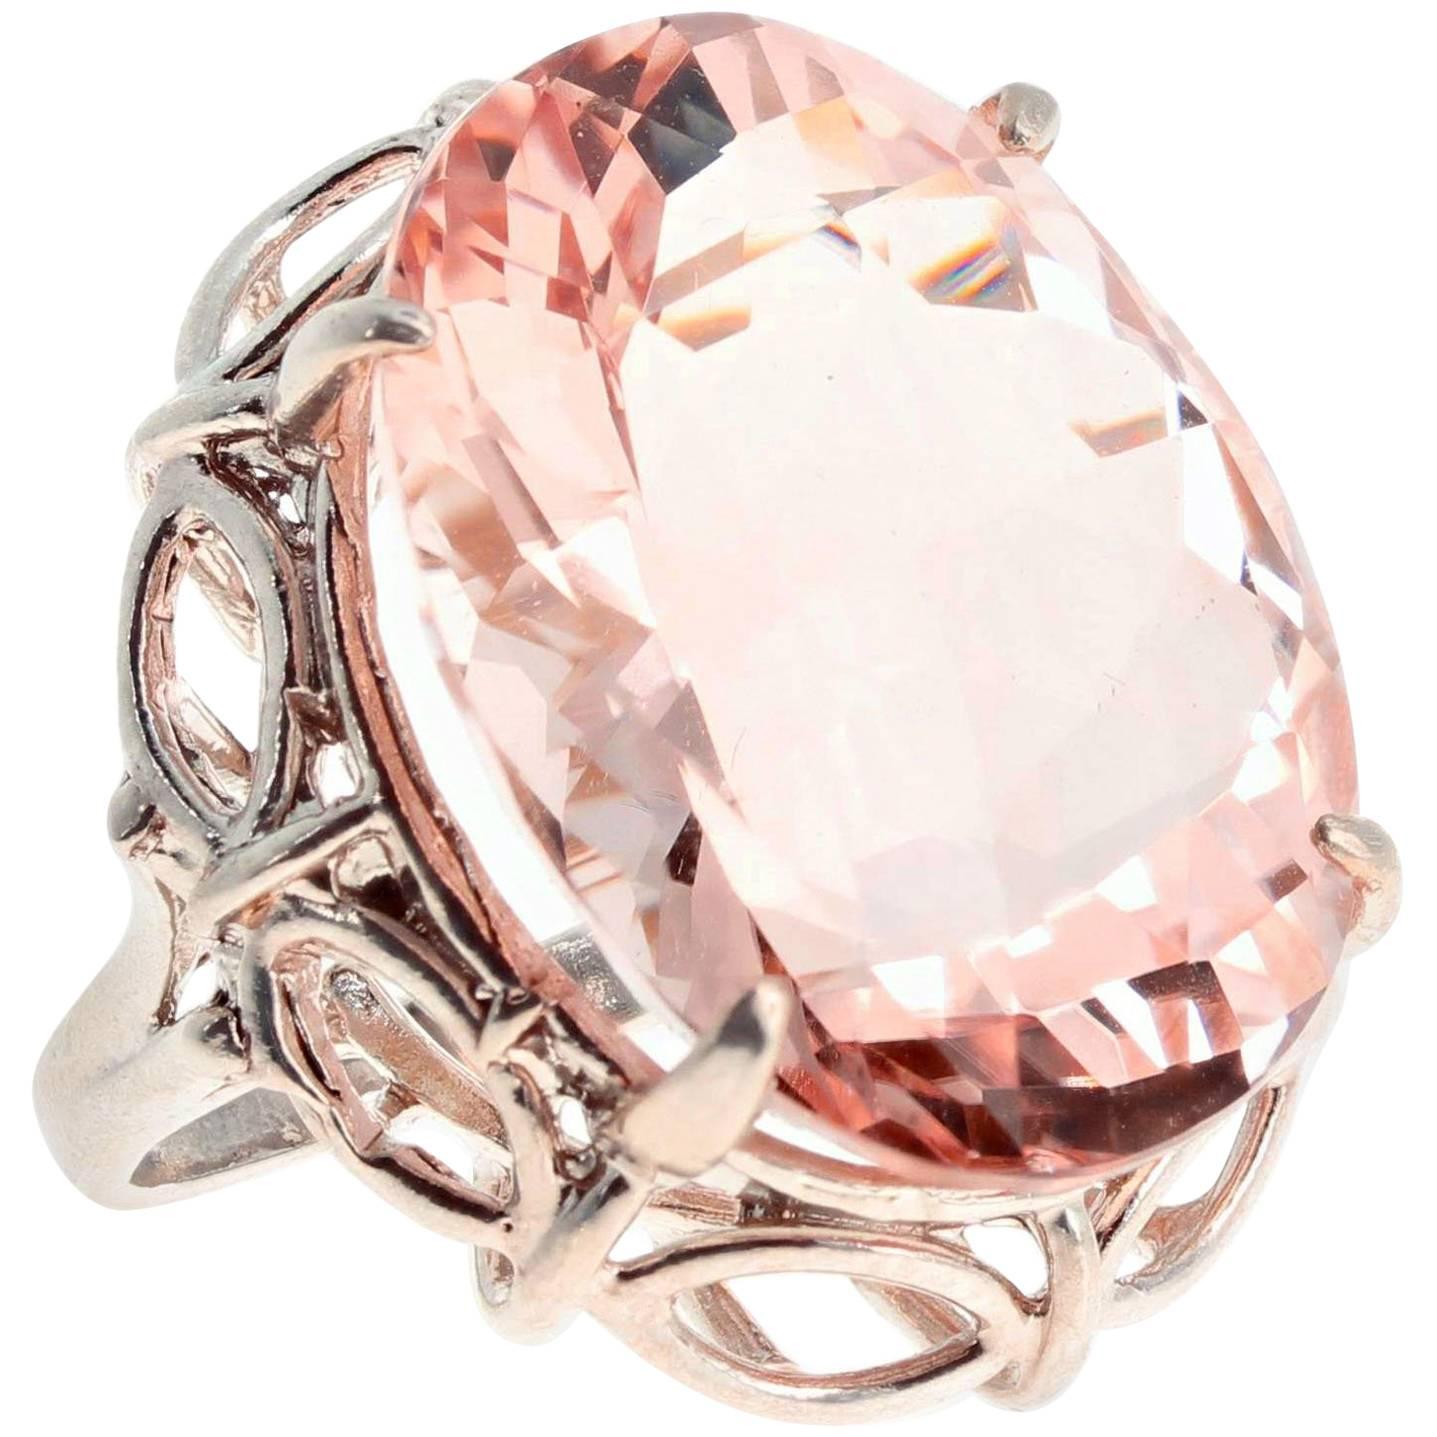 AJD Enormous Glowing Clear 30 Ct. Morganite Sterling Silver Cocktail Ring For Sale